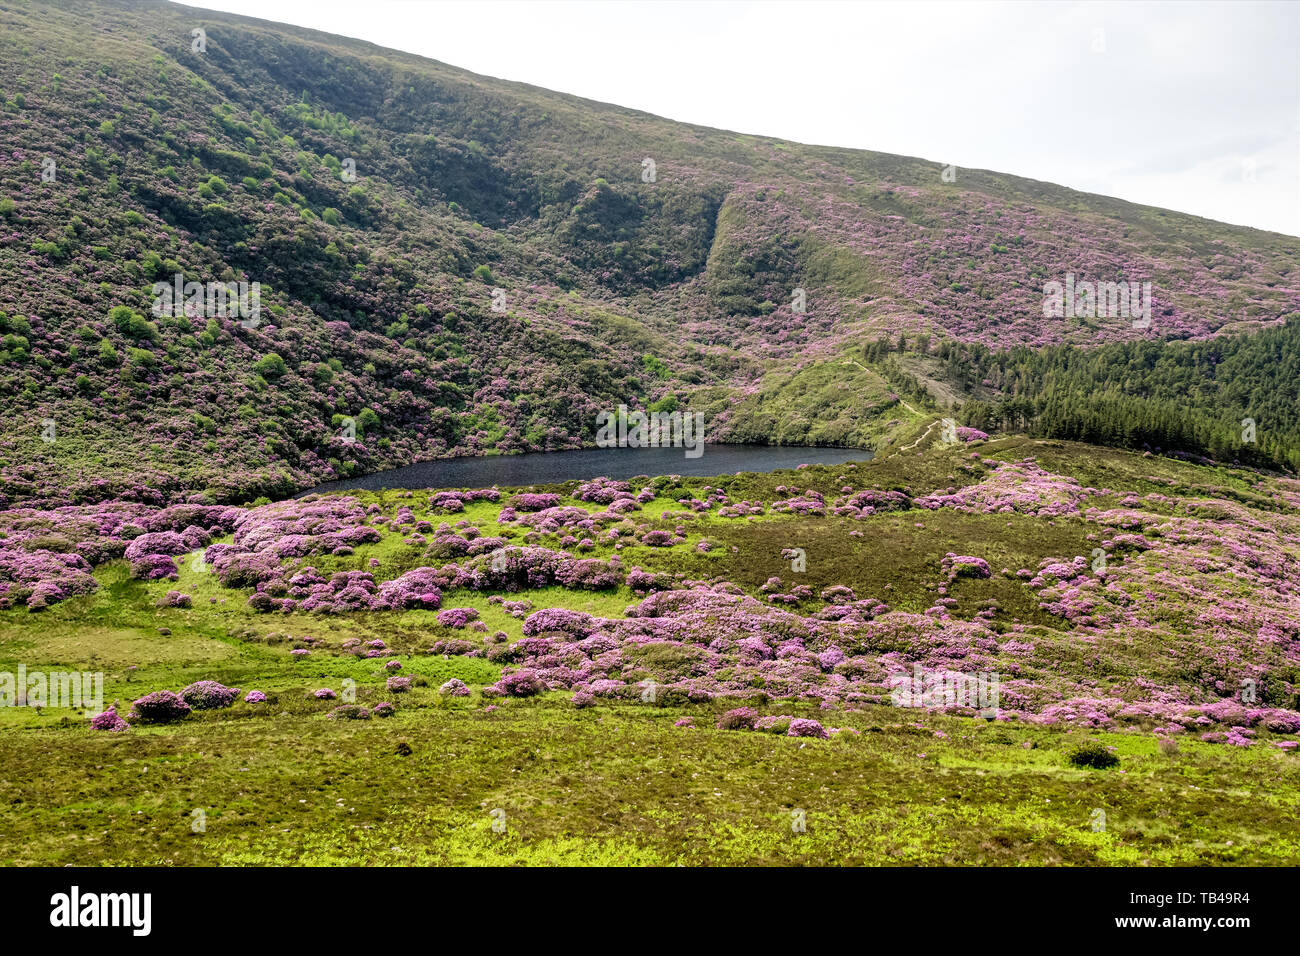 Rhododendron growing in the Vee valley on the Tipperary Waterford border in Ireland. Stock Photo